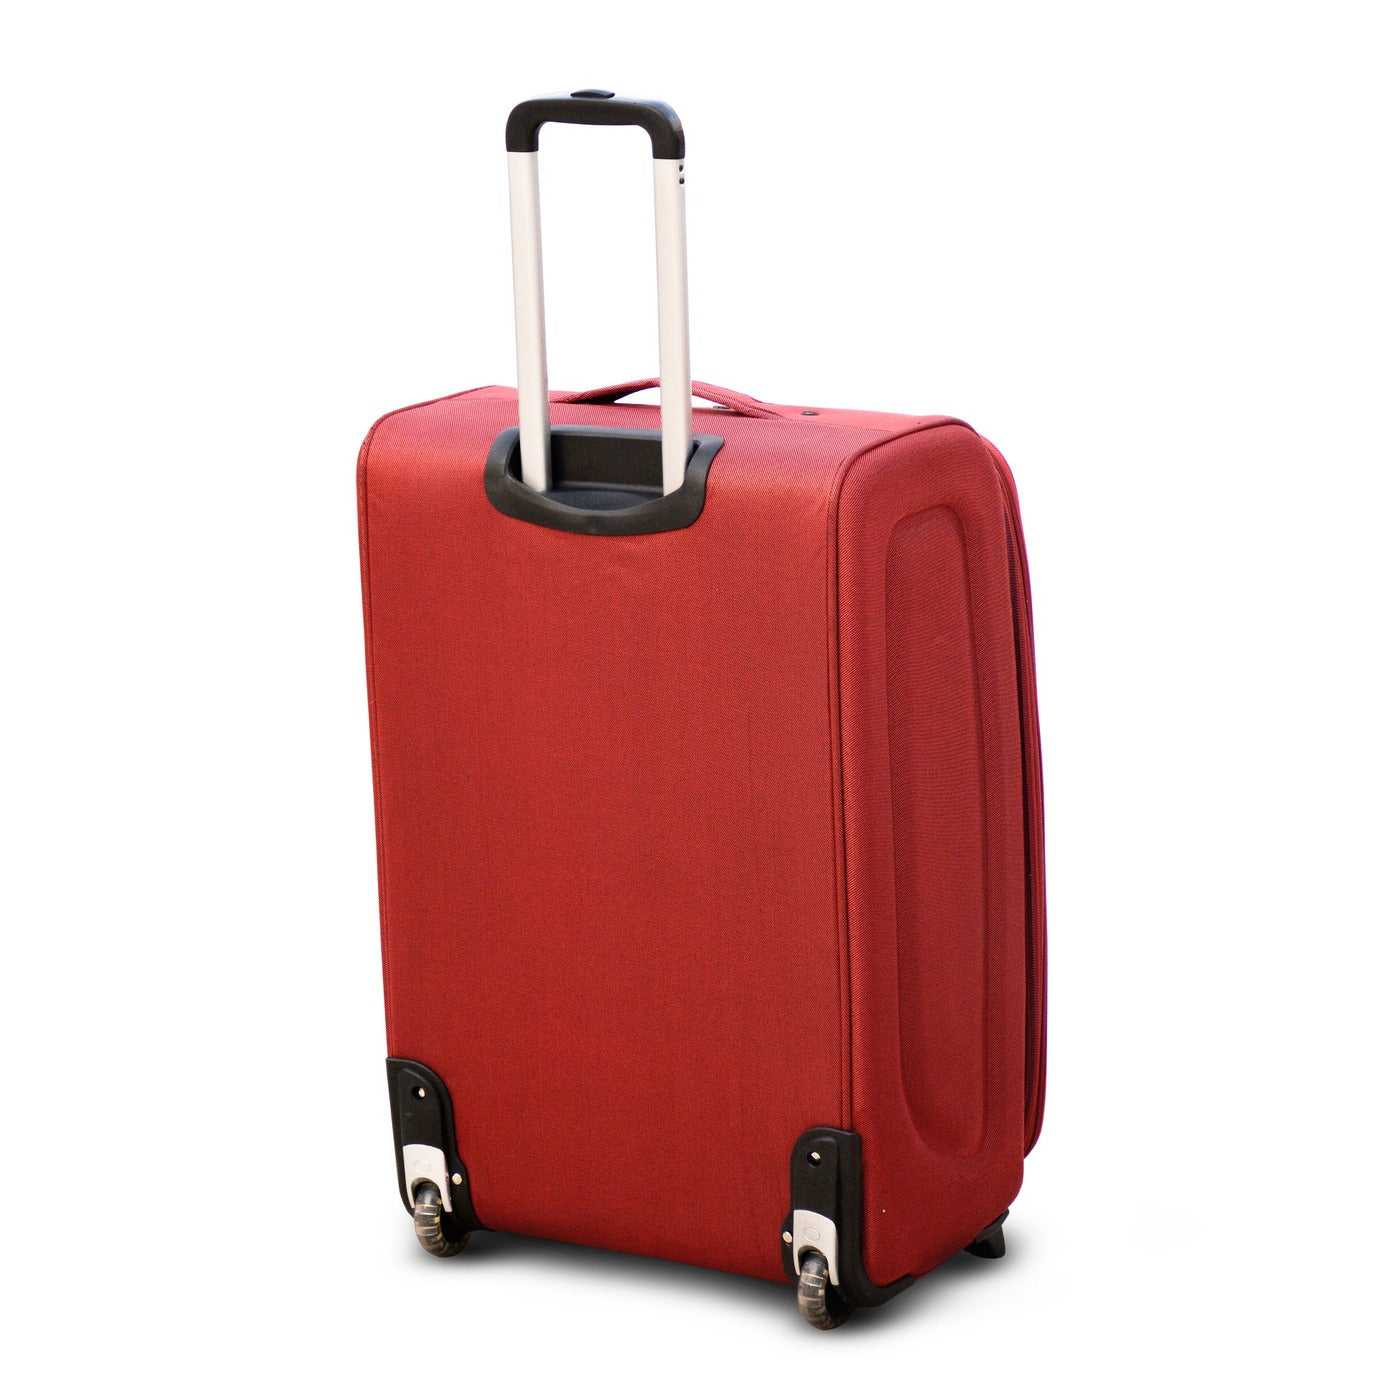 4 Piece Set 20" 24" 28" 32 Inches Red SJ JIAN 2 Wheel Lightweight Soft Material Luggage Bag